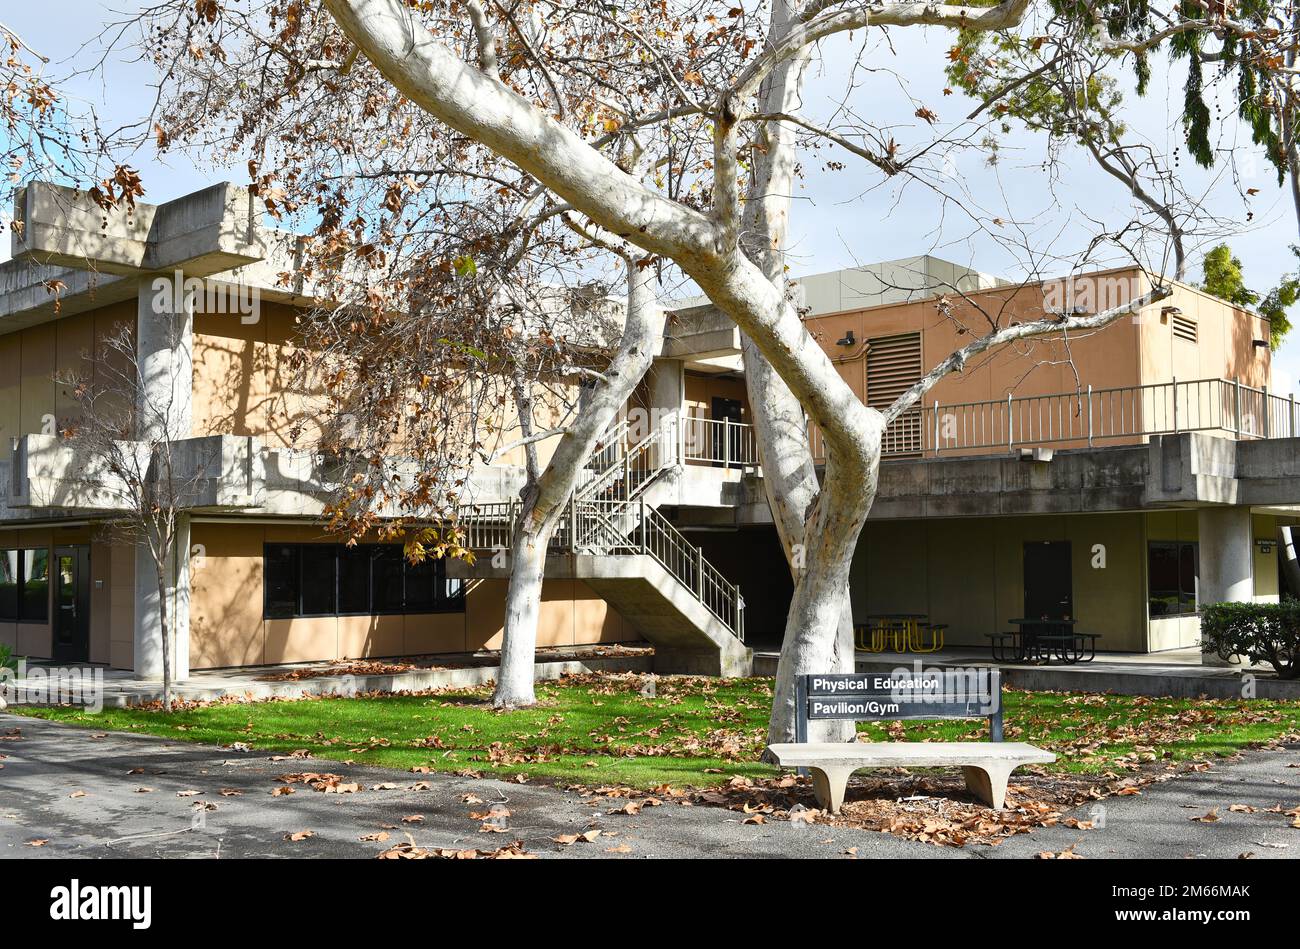 HUNTINGTON BEACH, CALIFORNIA - 01 JAN 2023: Physical Education building on the campus of Golden West College. Stock Photo